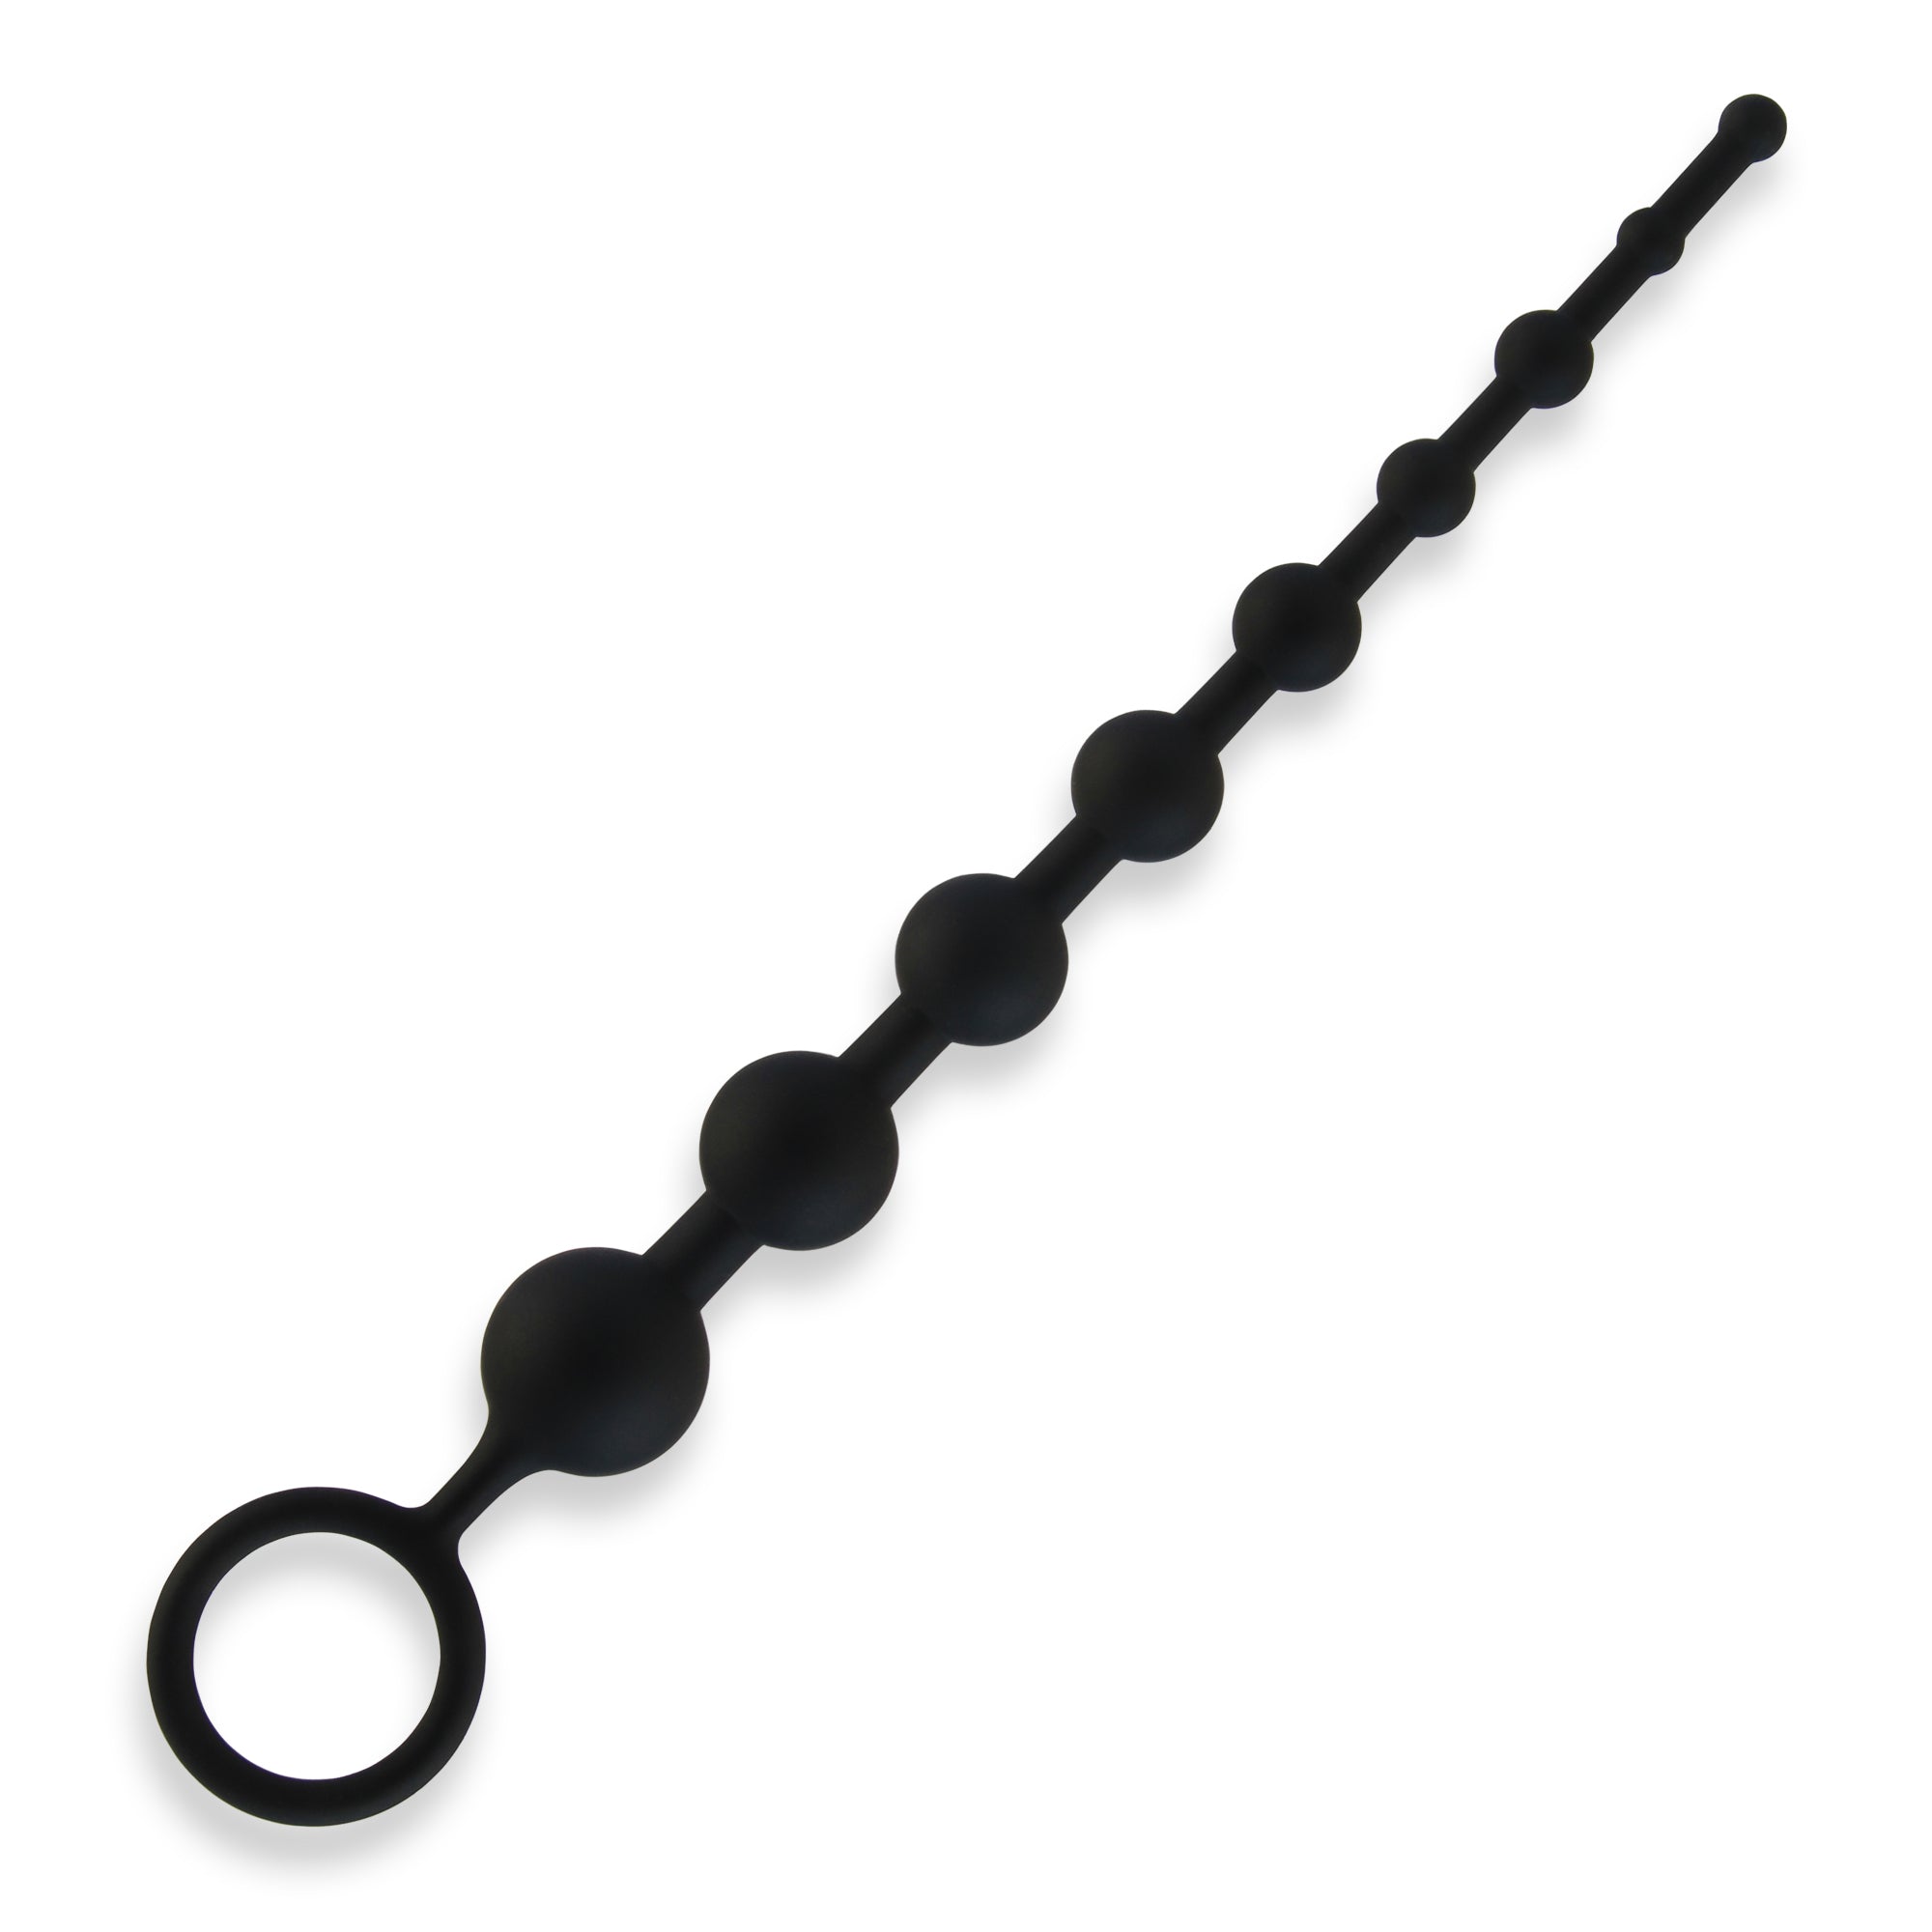 Hustler Body-Safe Silicone Anal Beads (9 Beads) in Black at glastoy.com